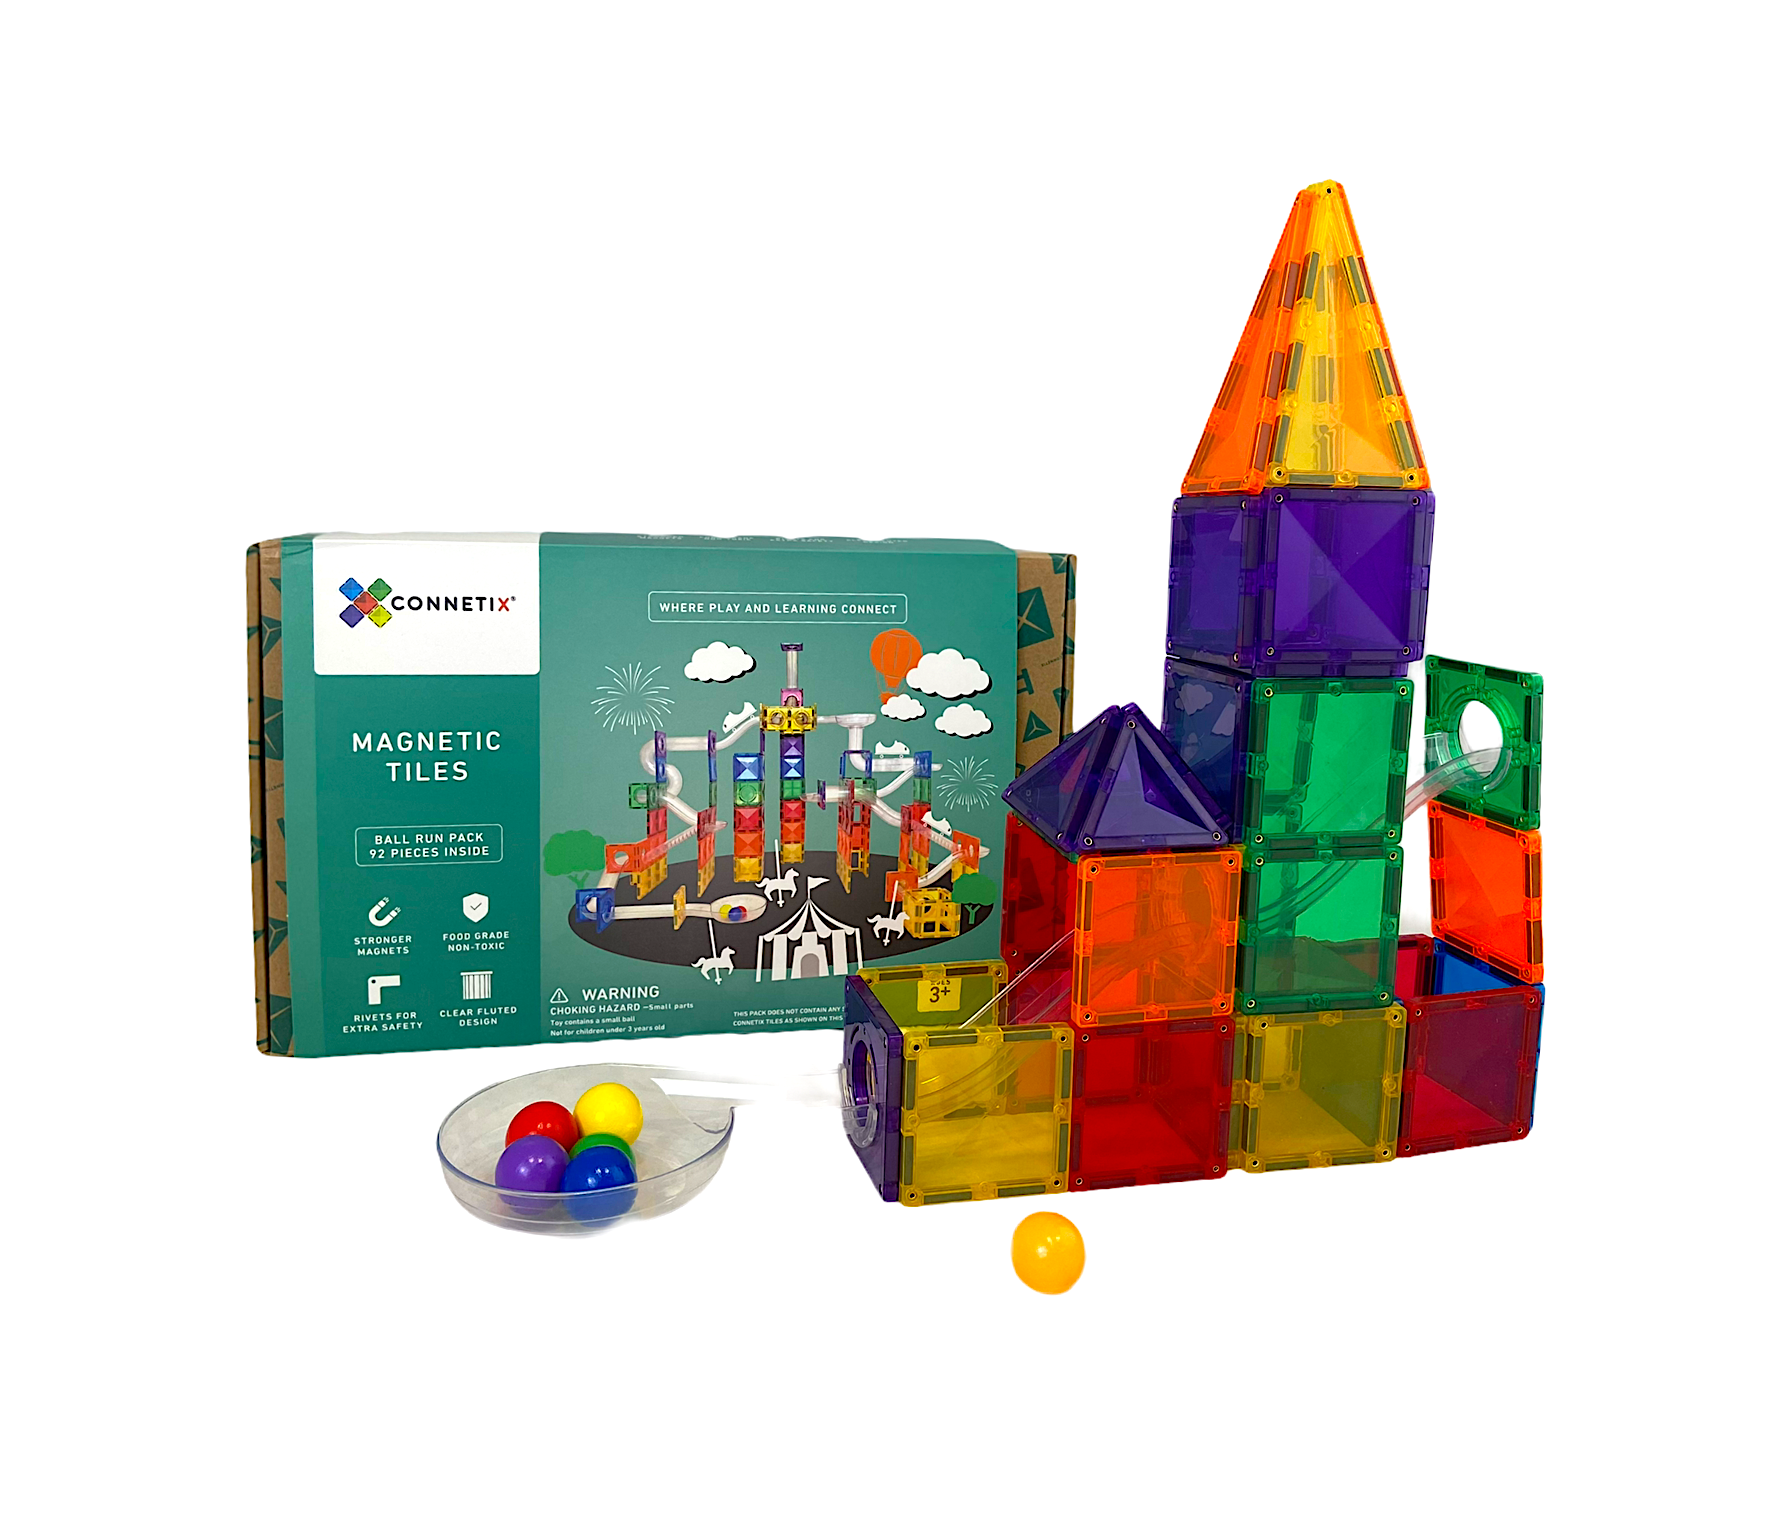 Connetix Ball Run Pack built in front of it's green box